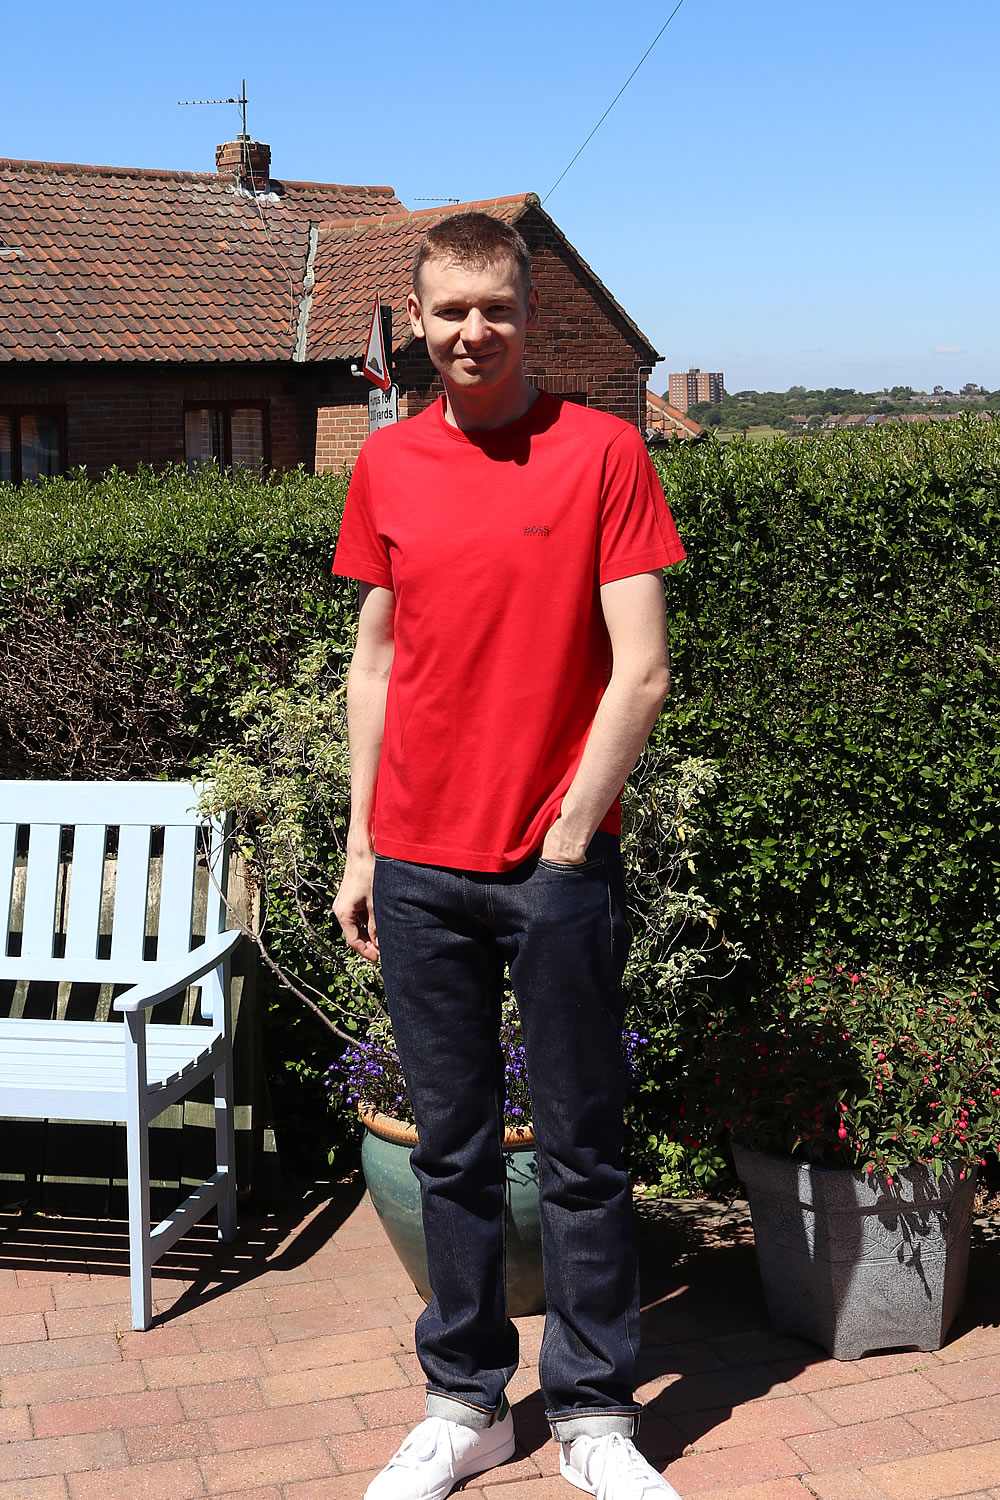 T-Shirt Tuesday: The Plain Red T-Shirt Outfit For Summer Style | Michael 84